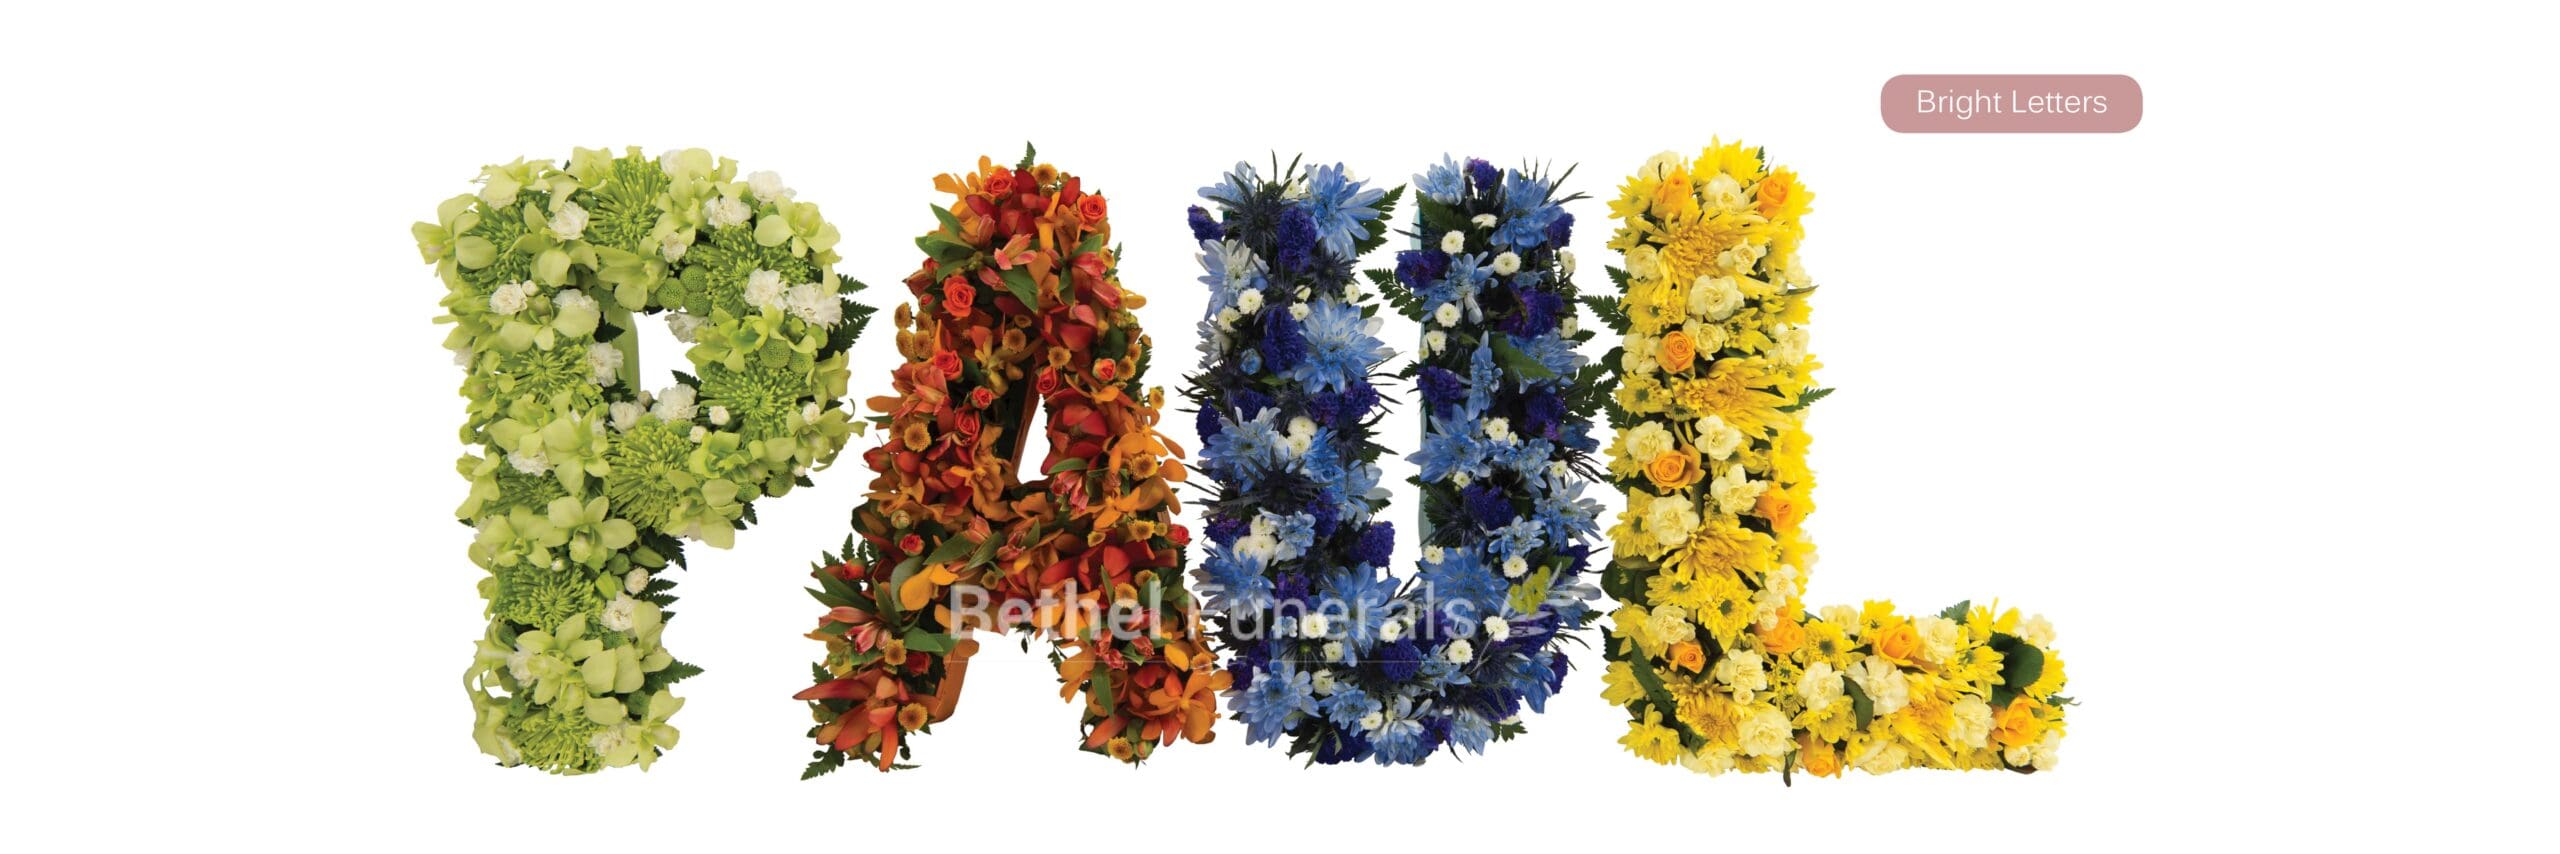 Bright Letters funeral flowers